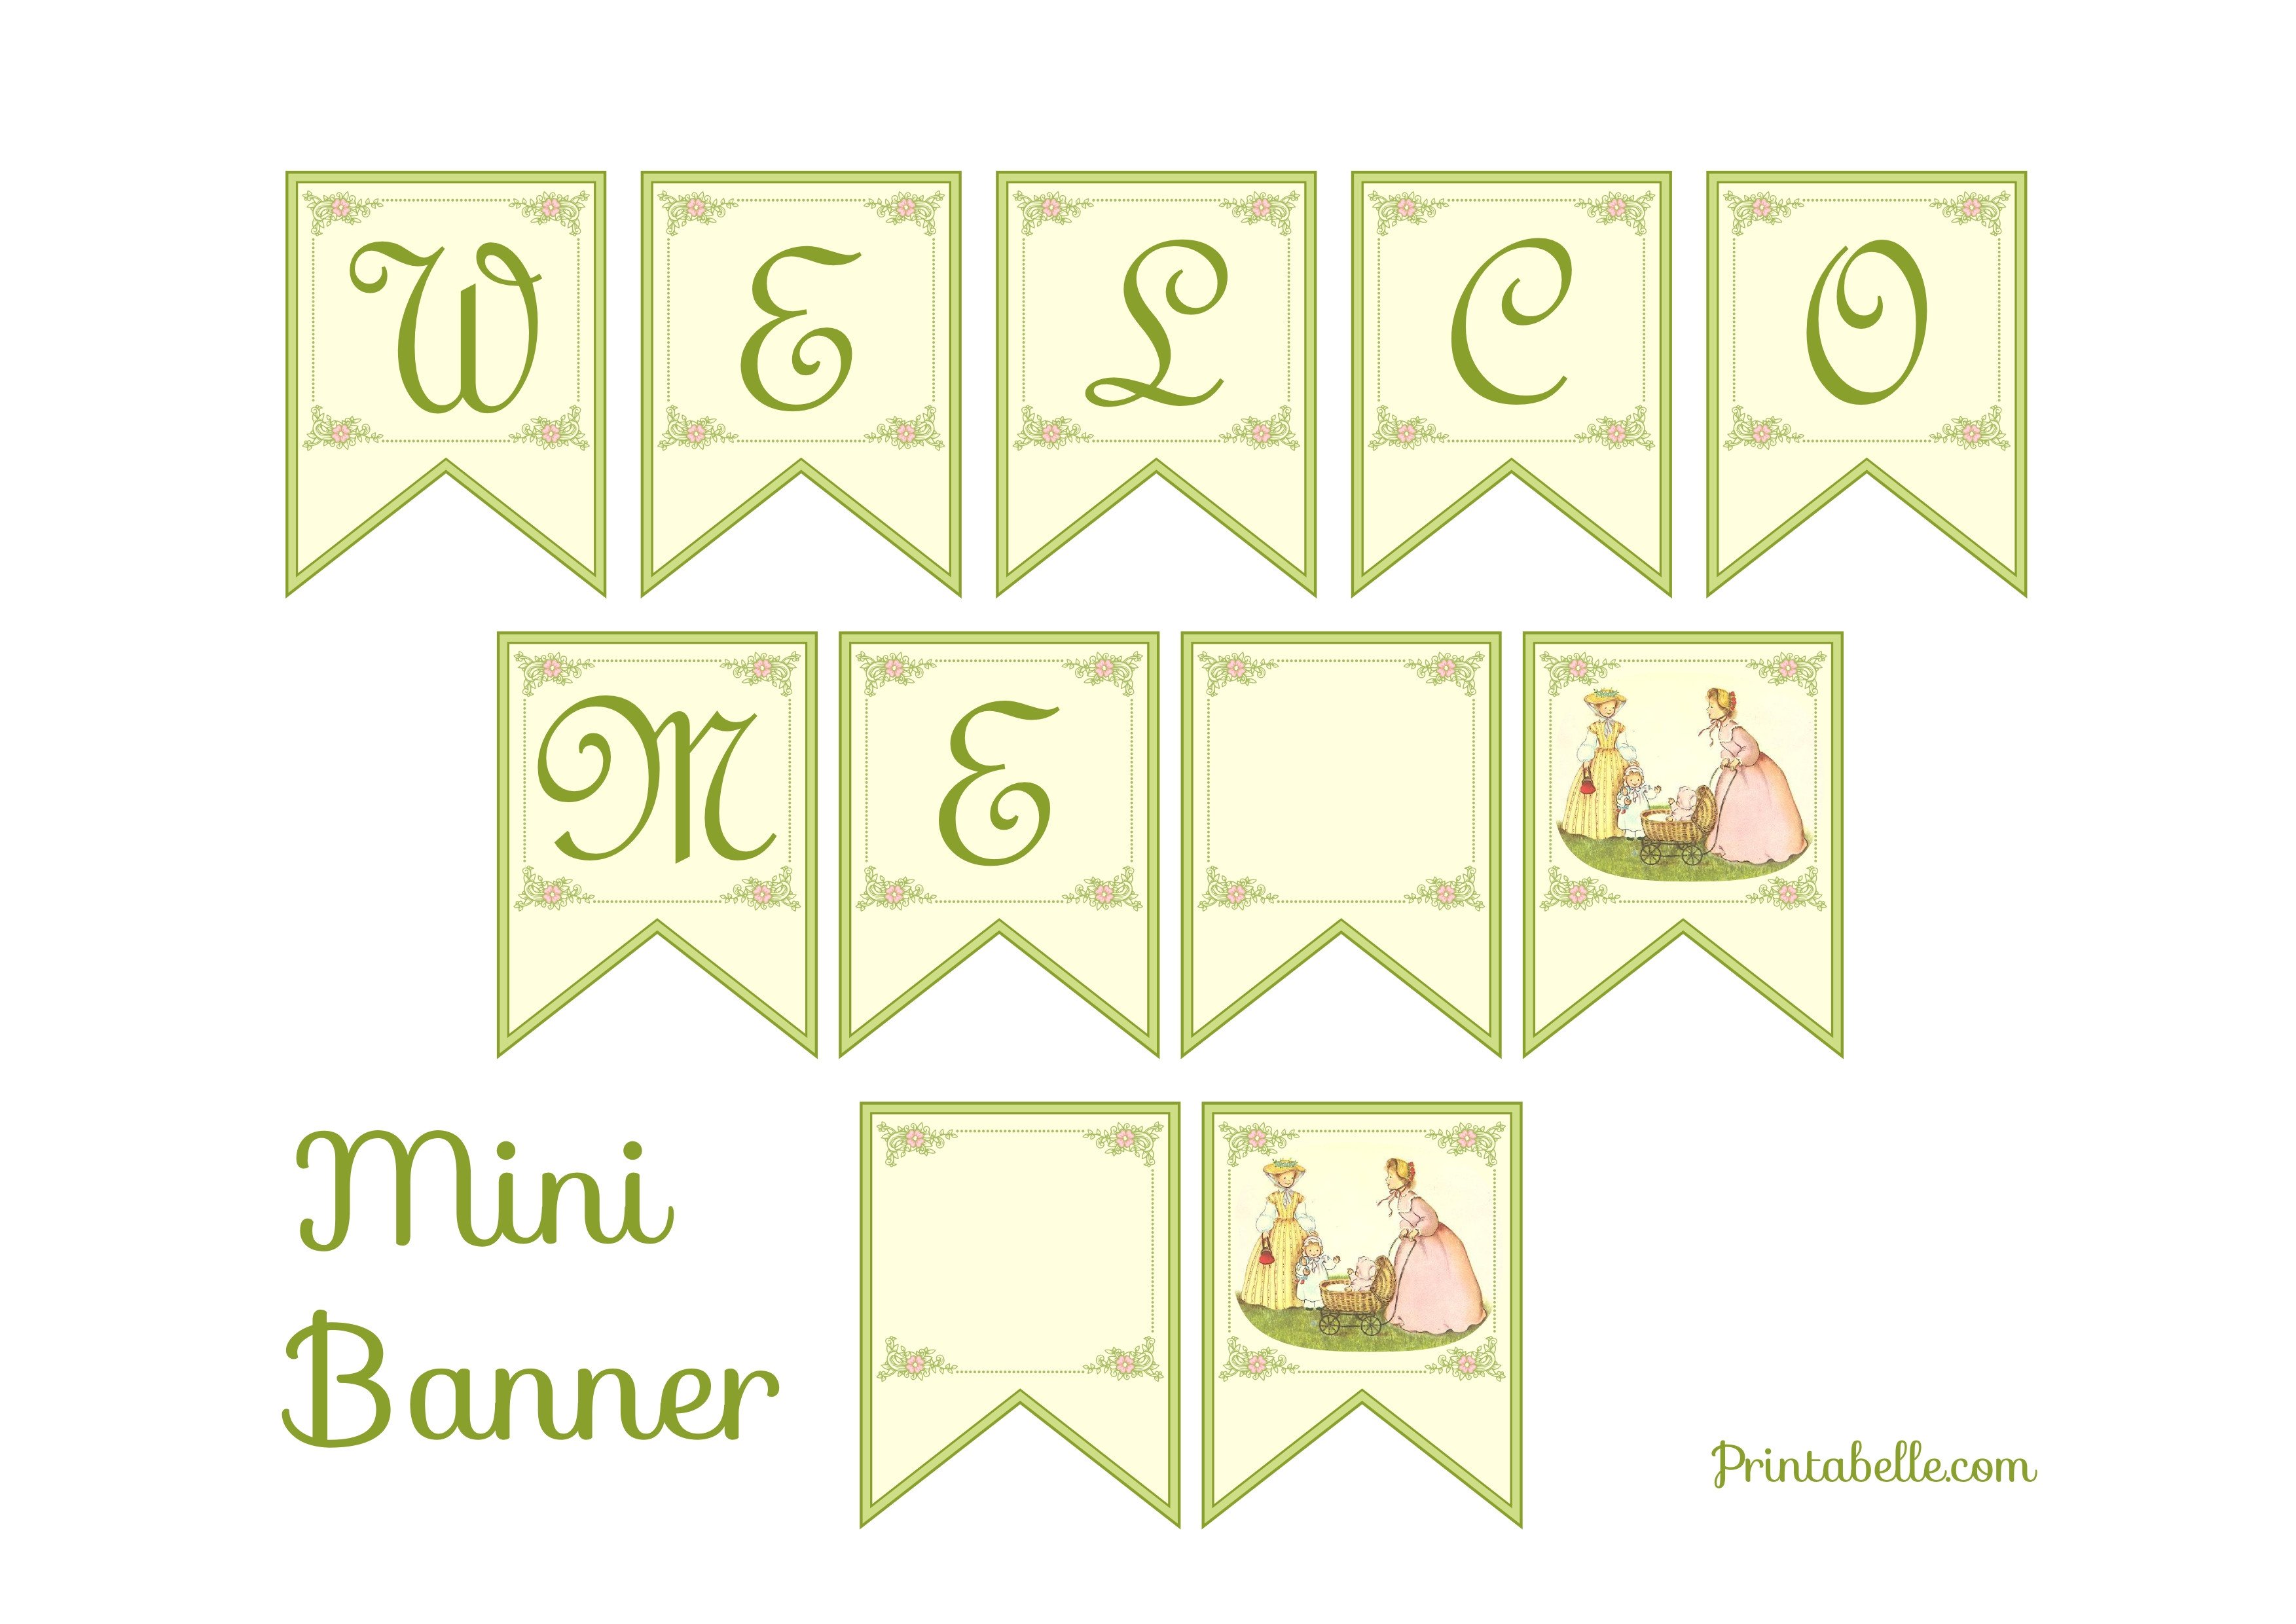 Baby Shower Banner Printable Free Vintage Baby Shower Printables From Printabelle